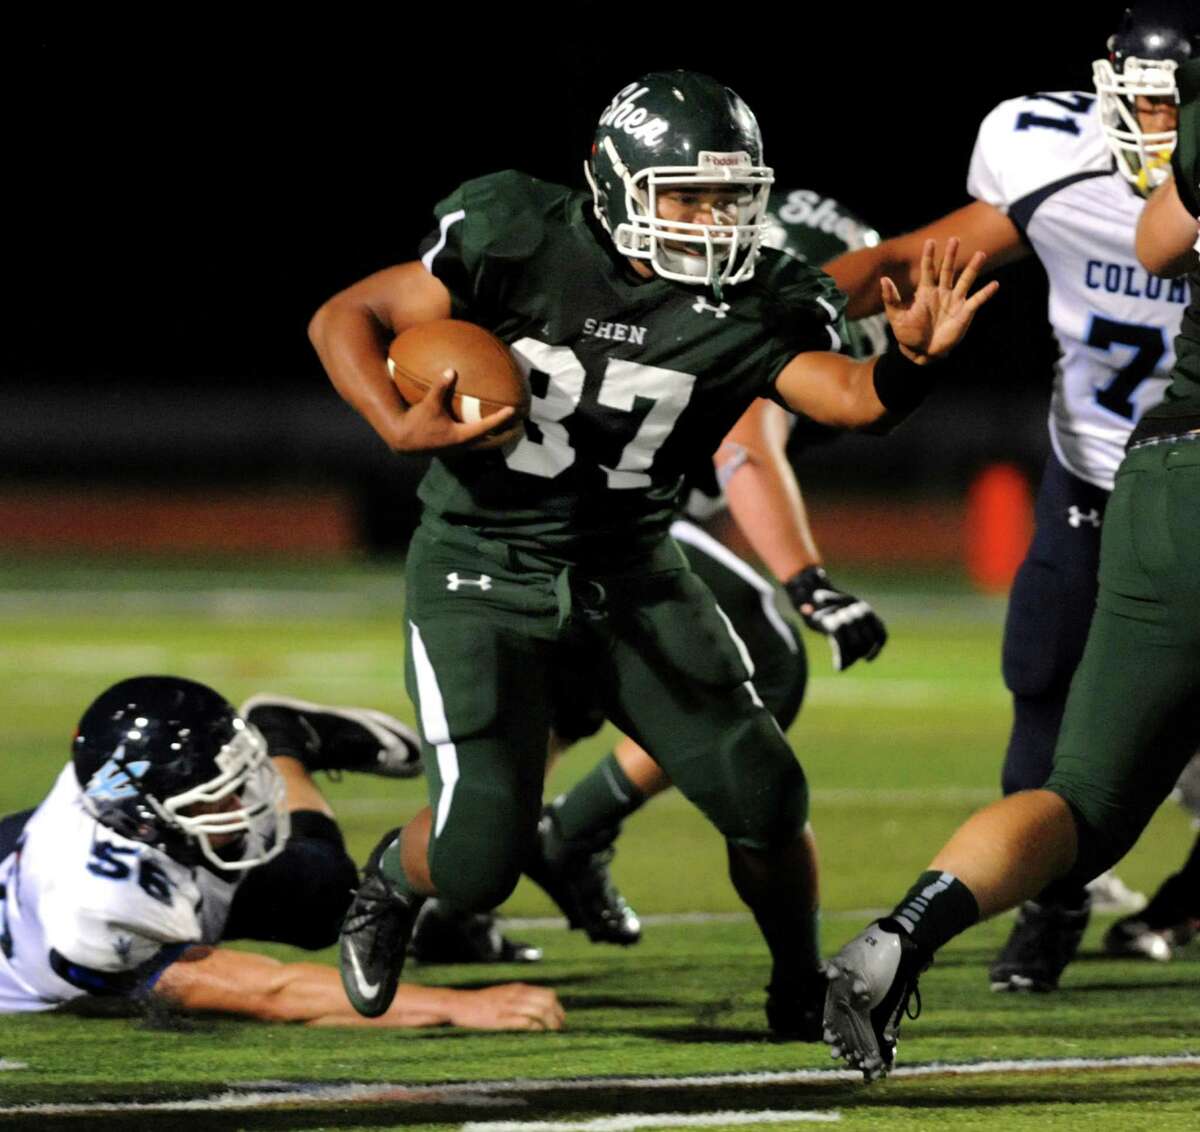 Shenendehowa's Oliver Robinson, center, gains yards during their football game against Columbia on Friday, Sept. 6, 2013, at Shenendehowa High in Clifton Park, N.Y. (Cindy Schultz / Times Union)